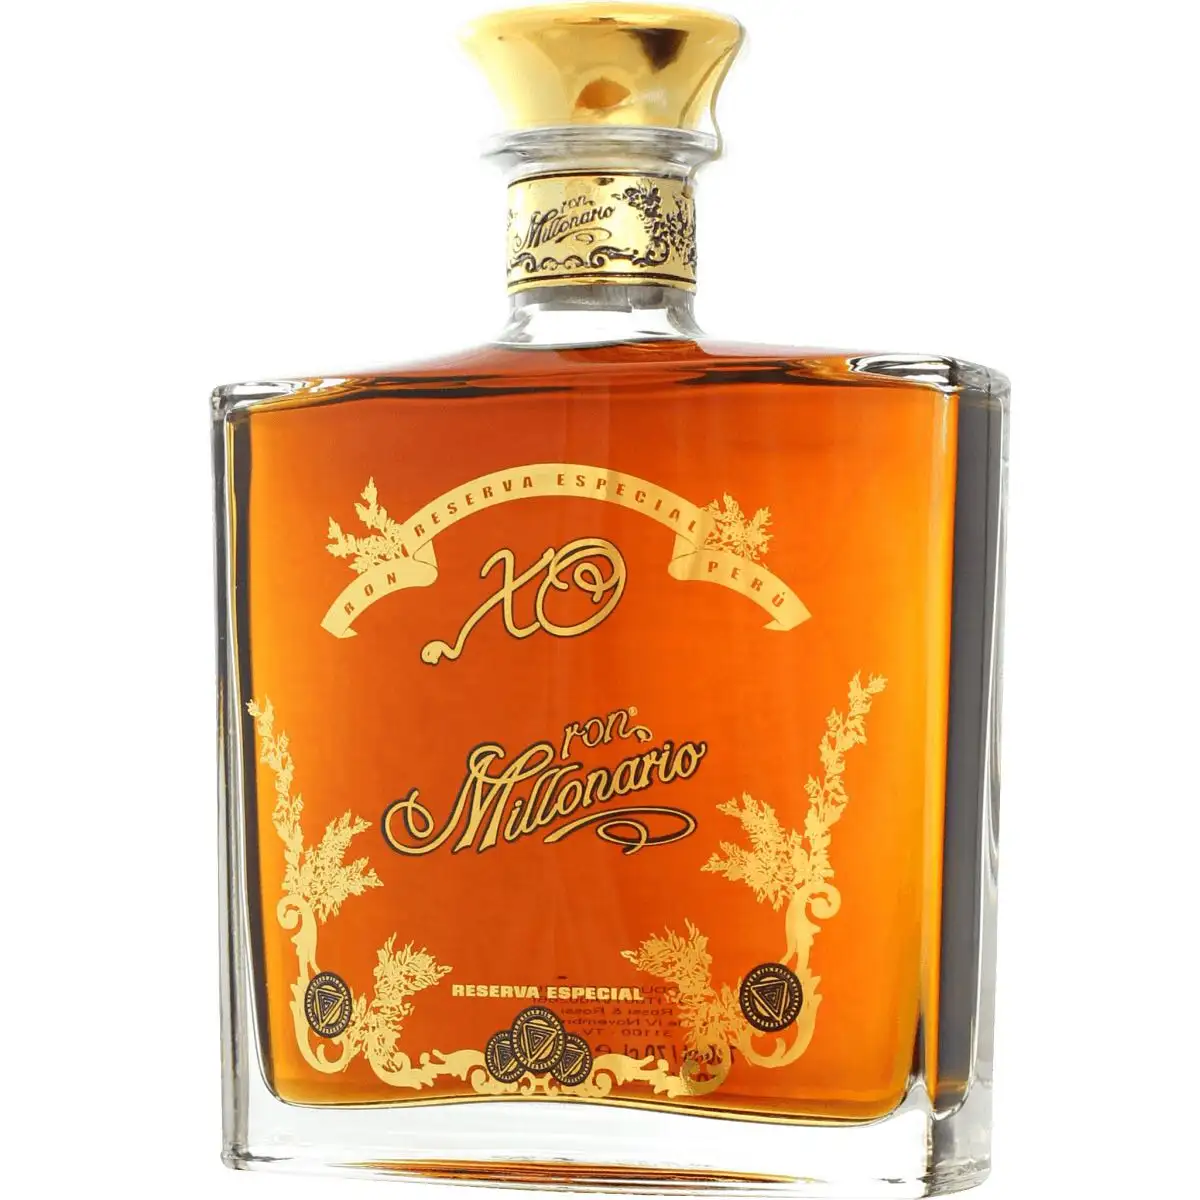 Image of the front of the bottle of the rum Millonario Solera XO